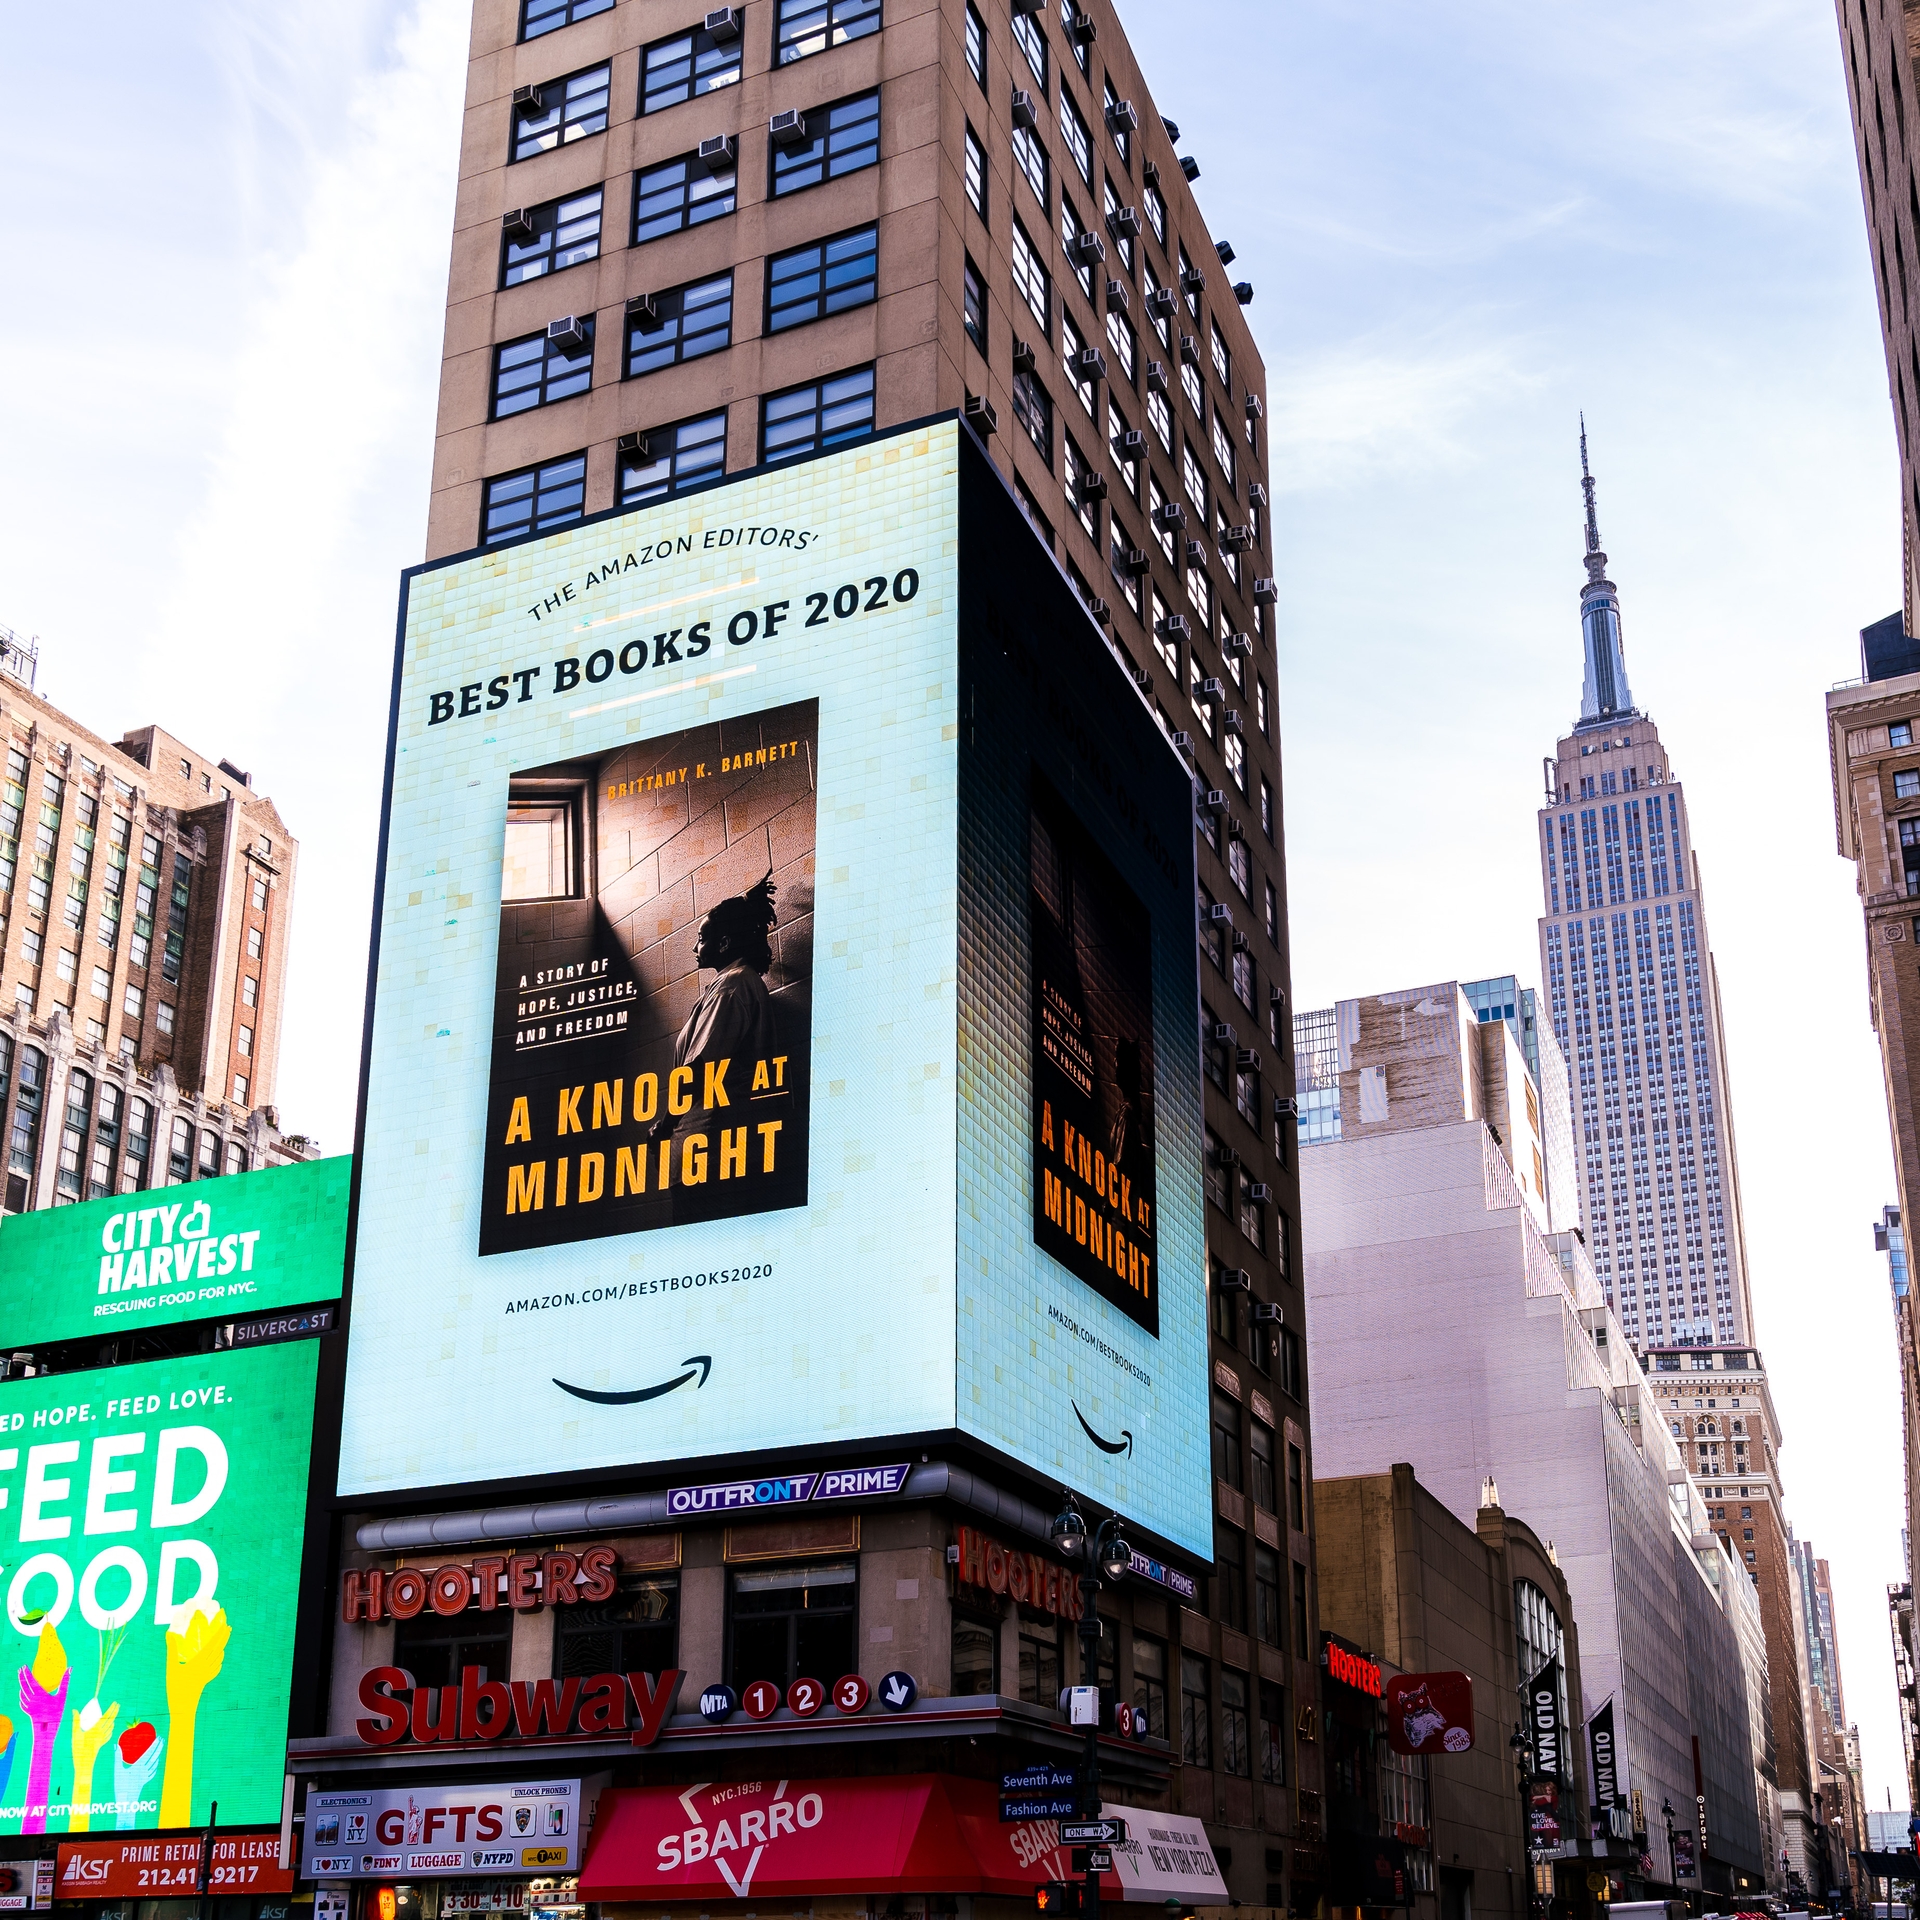 New York Square takeover of book title included Amazon's Best Books of the Year 2020 list. 